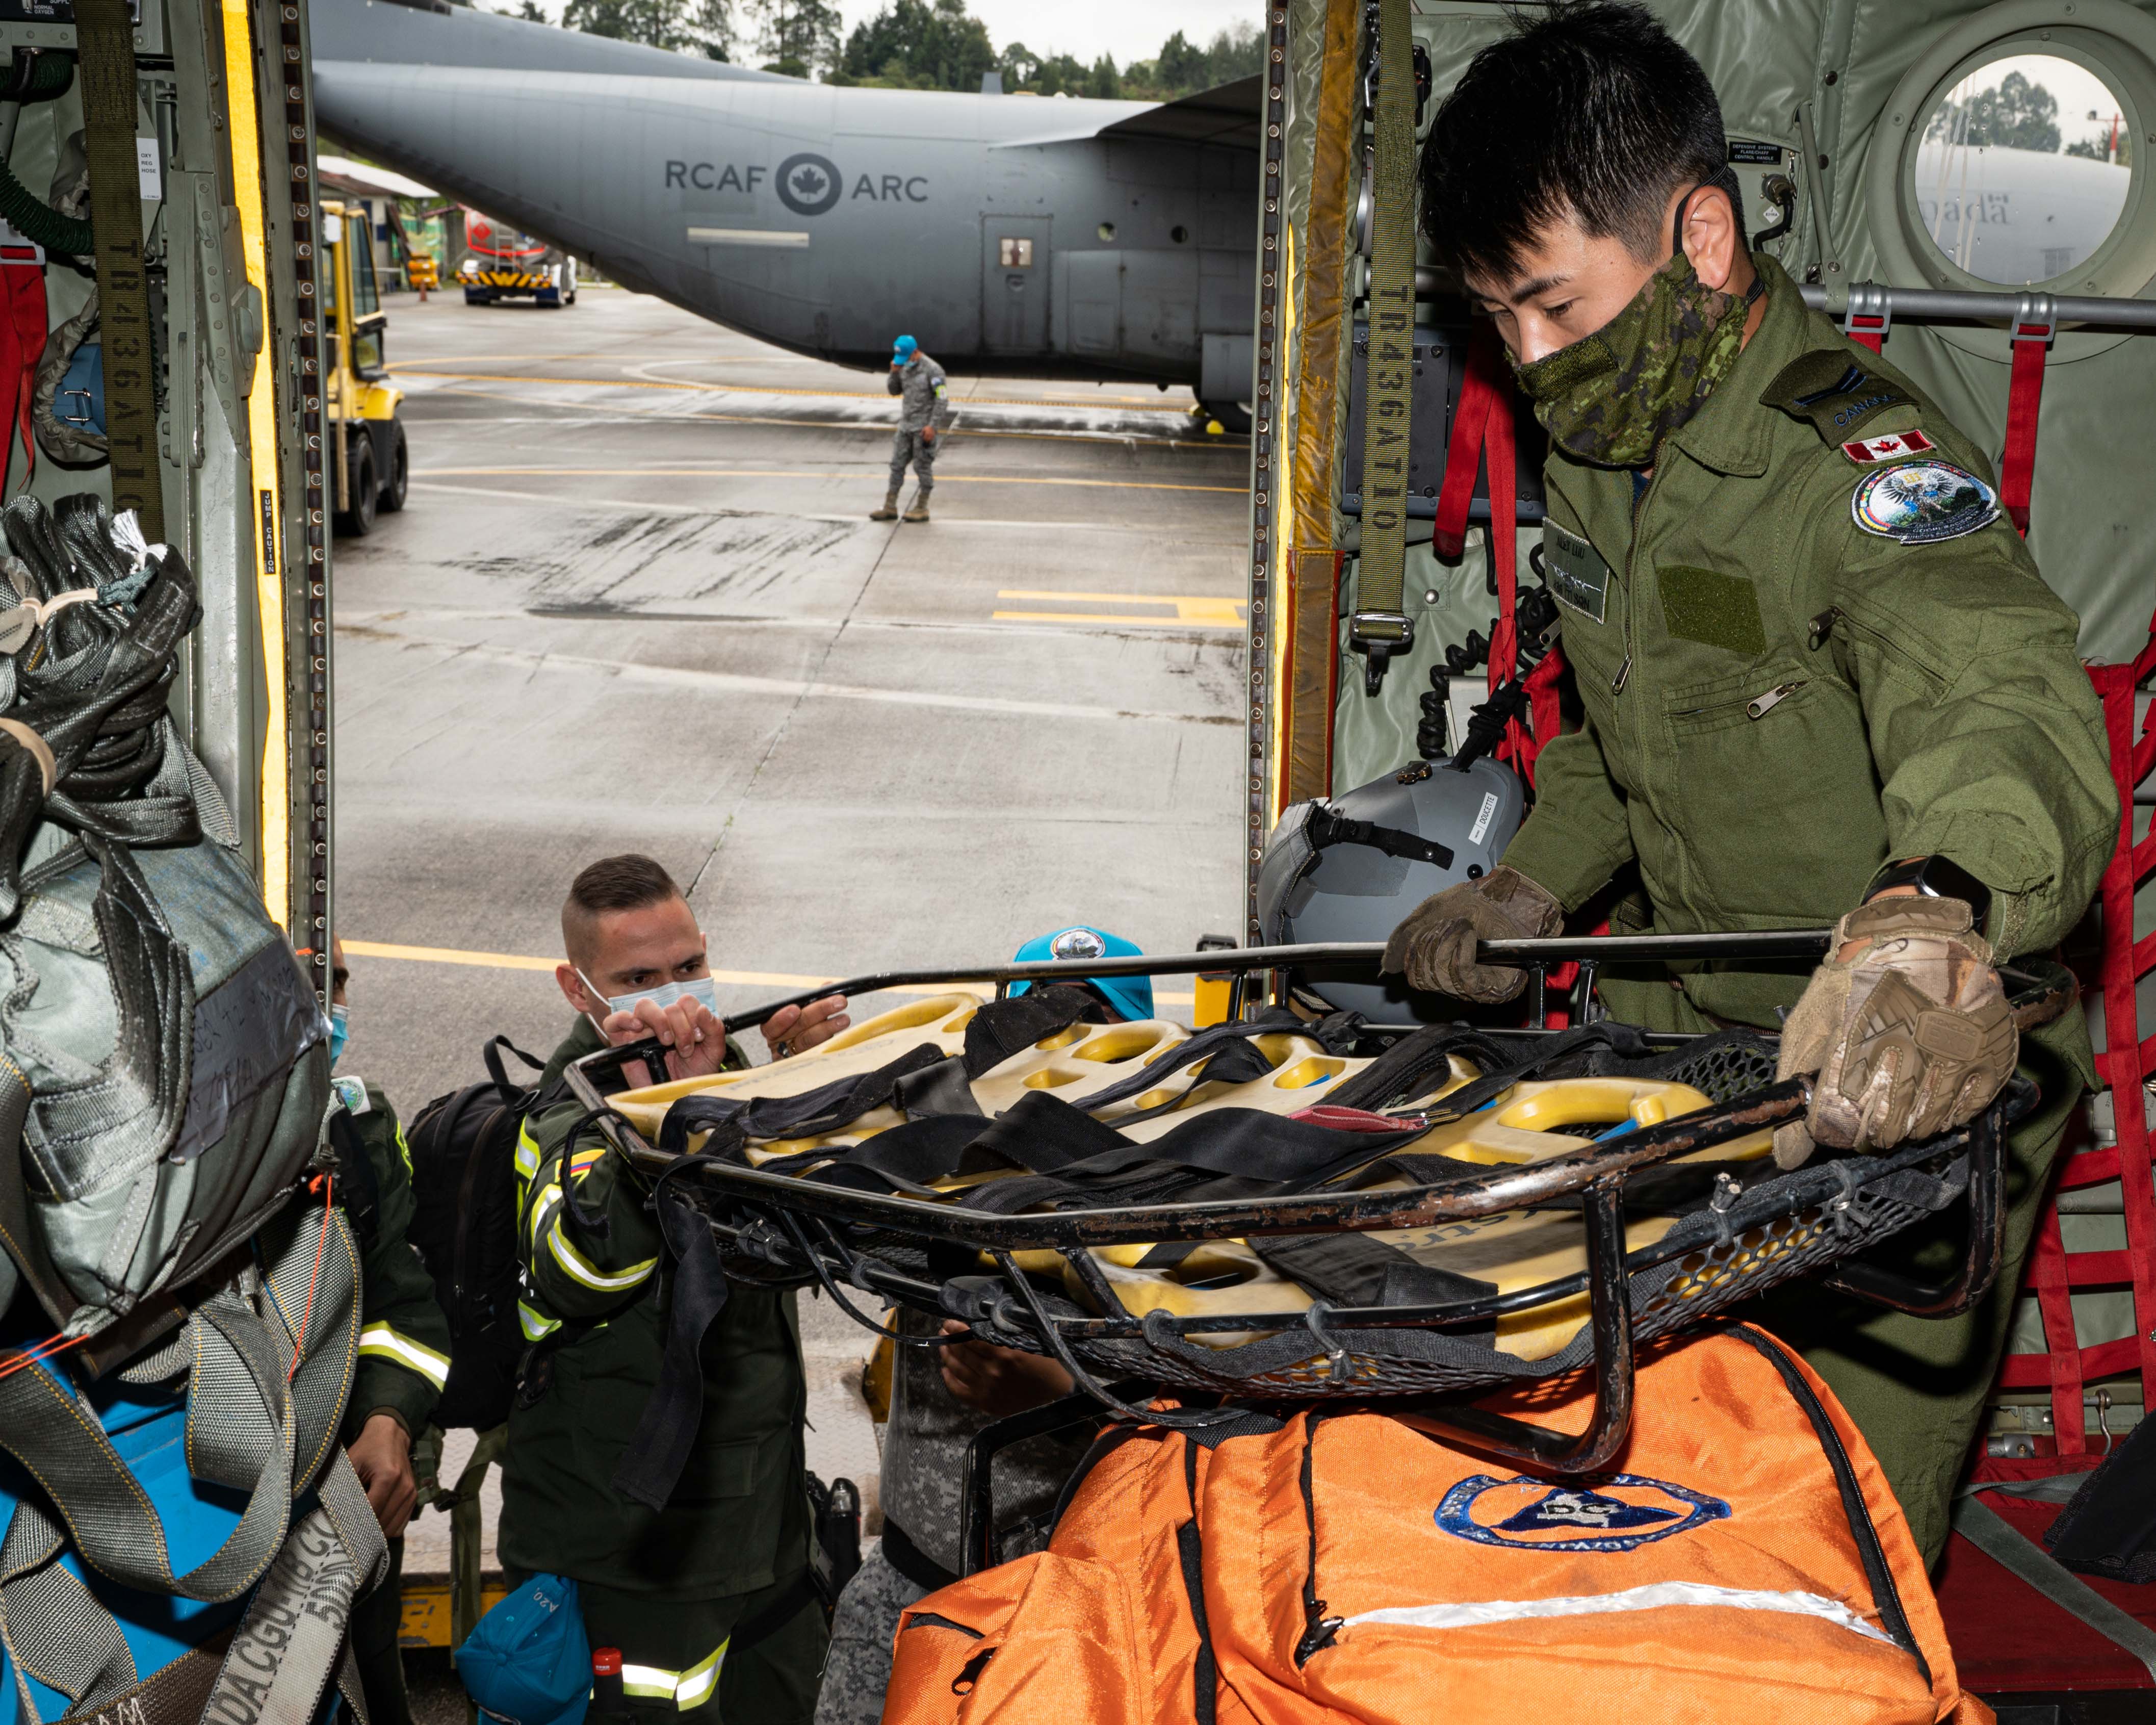 Corporal Alex Luu loads rescue equipment inside a CC-130 Hercules at Arturo Lema Posada Air Base in Colombia during Exercise COOPERACION VII on 31 August 2021. PHOTO: Corporal Dominic Duchesne-Beaulieu